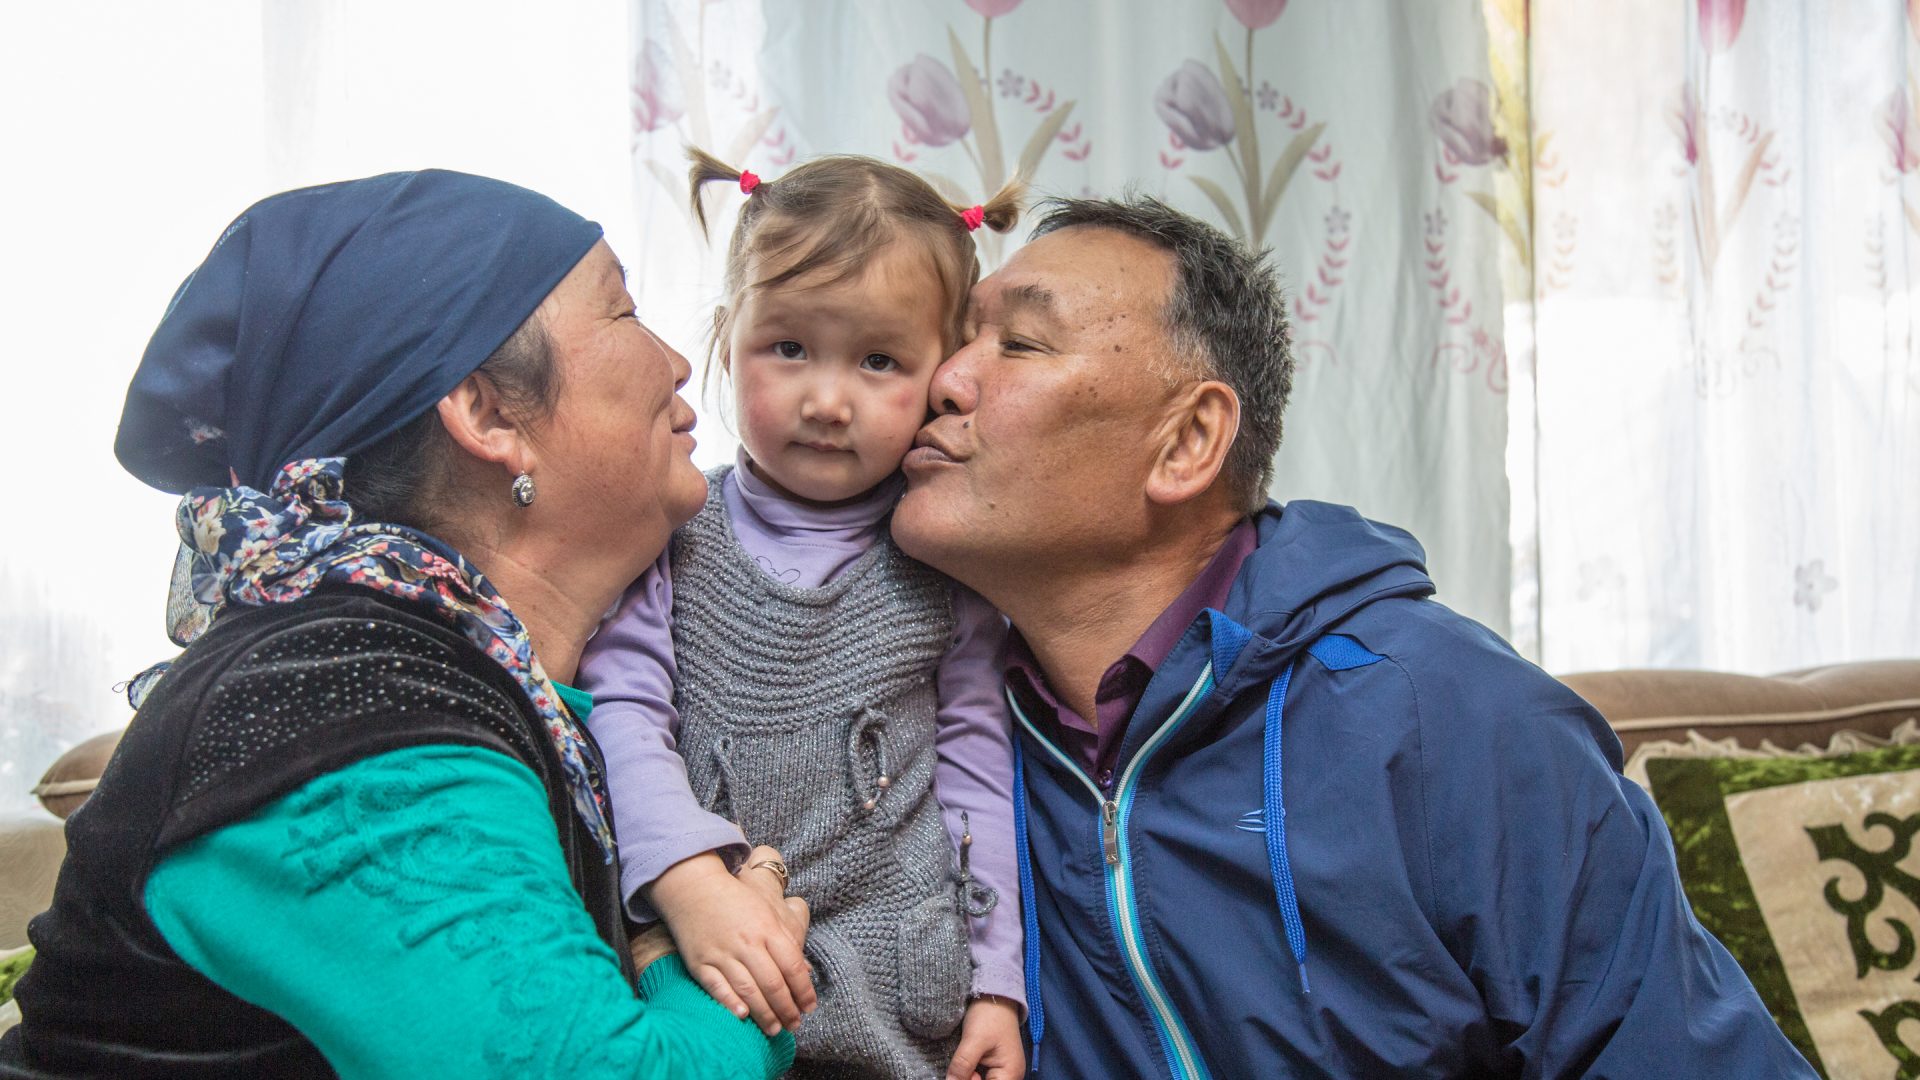 Older people in Central Asia